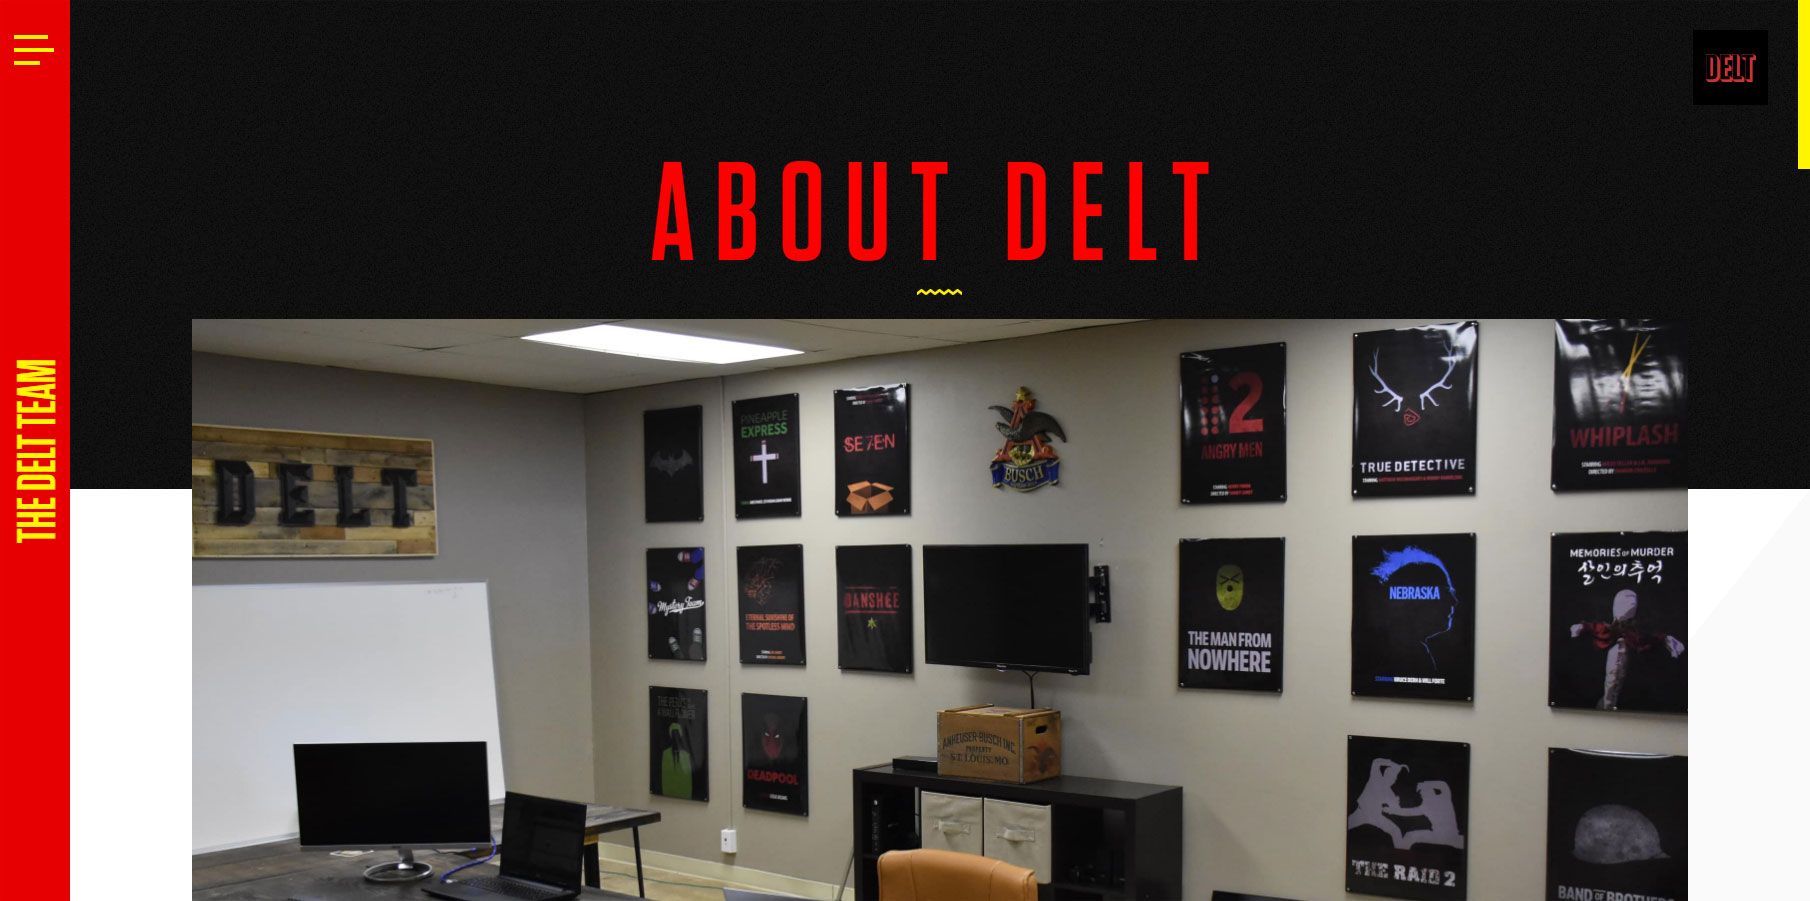 DELT - Website of the Day